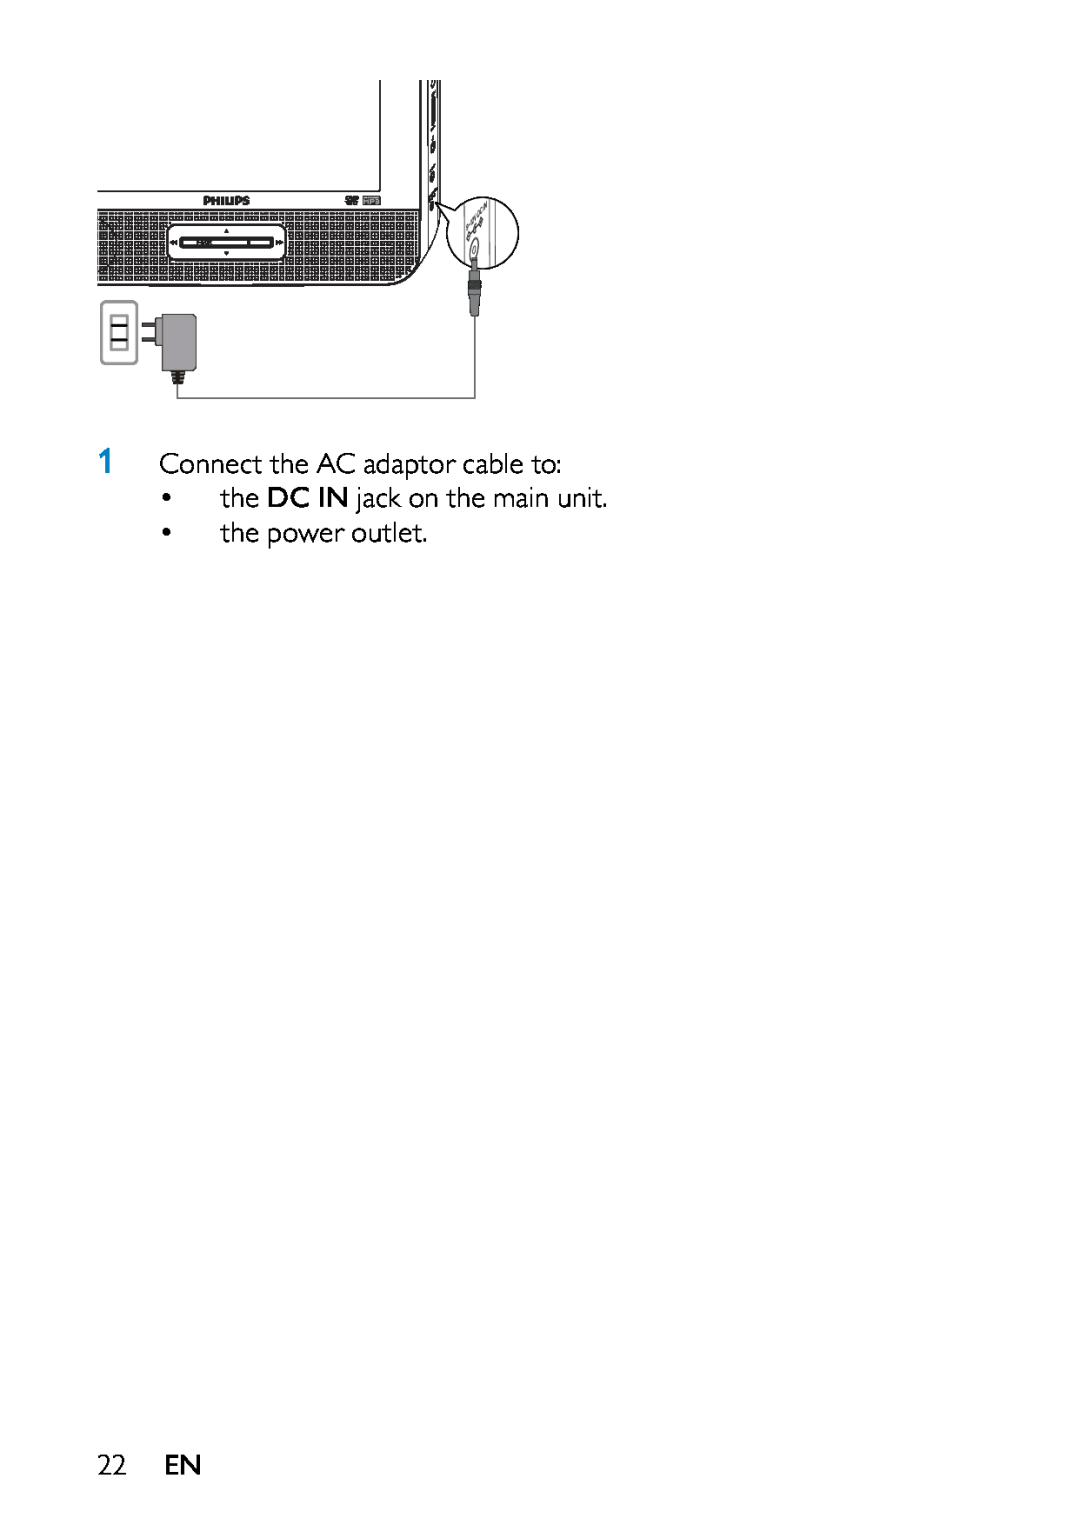 Philips PD7013/79 user manual Connect the AC adaptor cable to the DC IN jack on the main unit, the power outlet 22 EN 